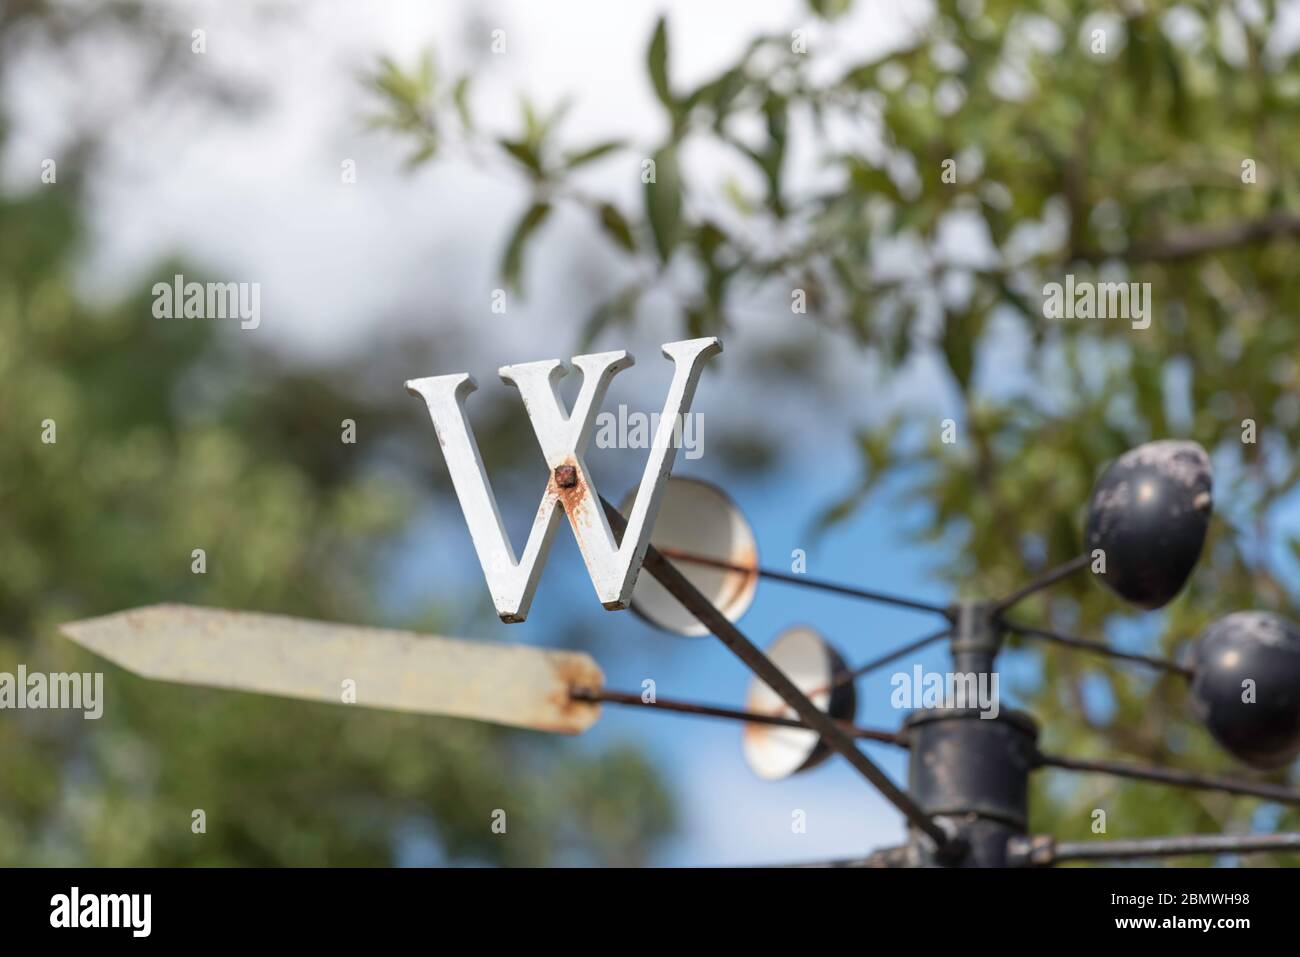 A large white metal W symbol on a weather vane or wind vane in a Sydney, Australia garden Stock Photo